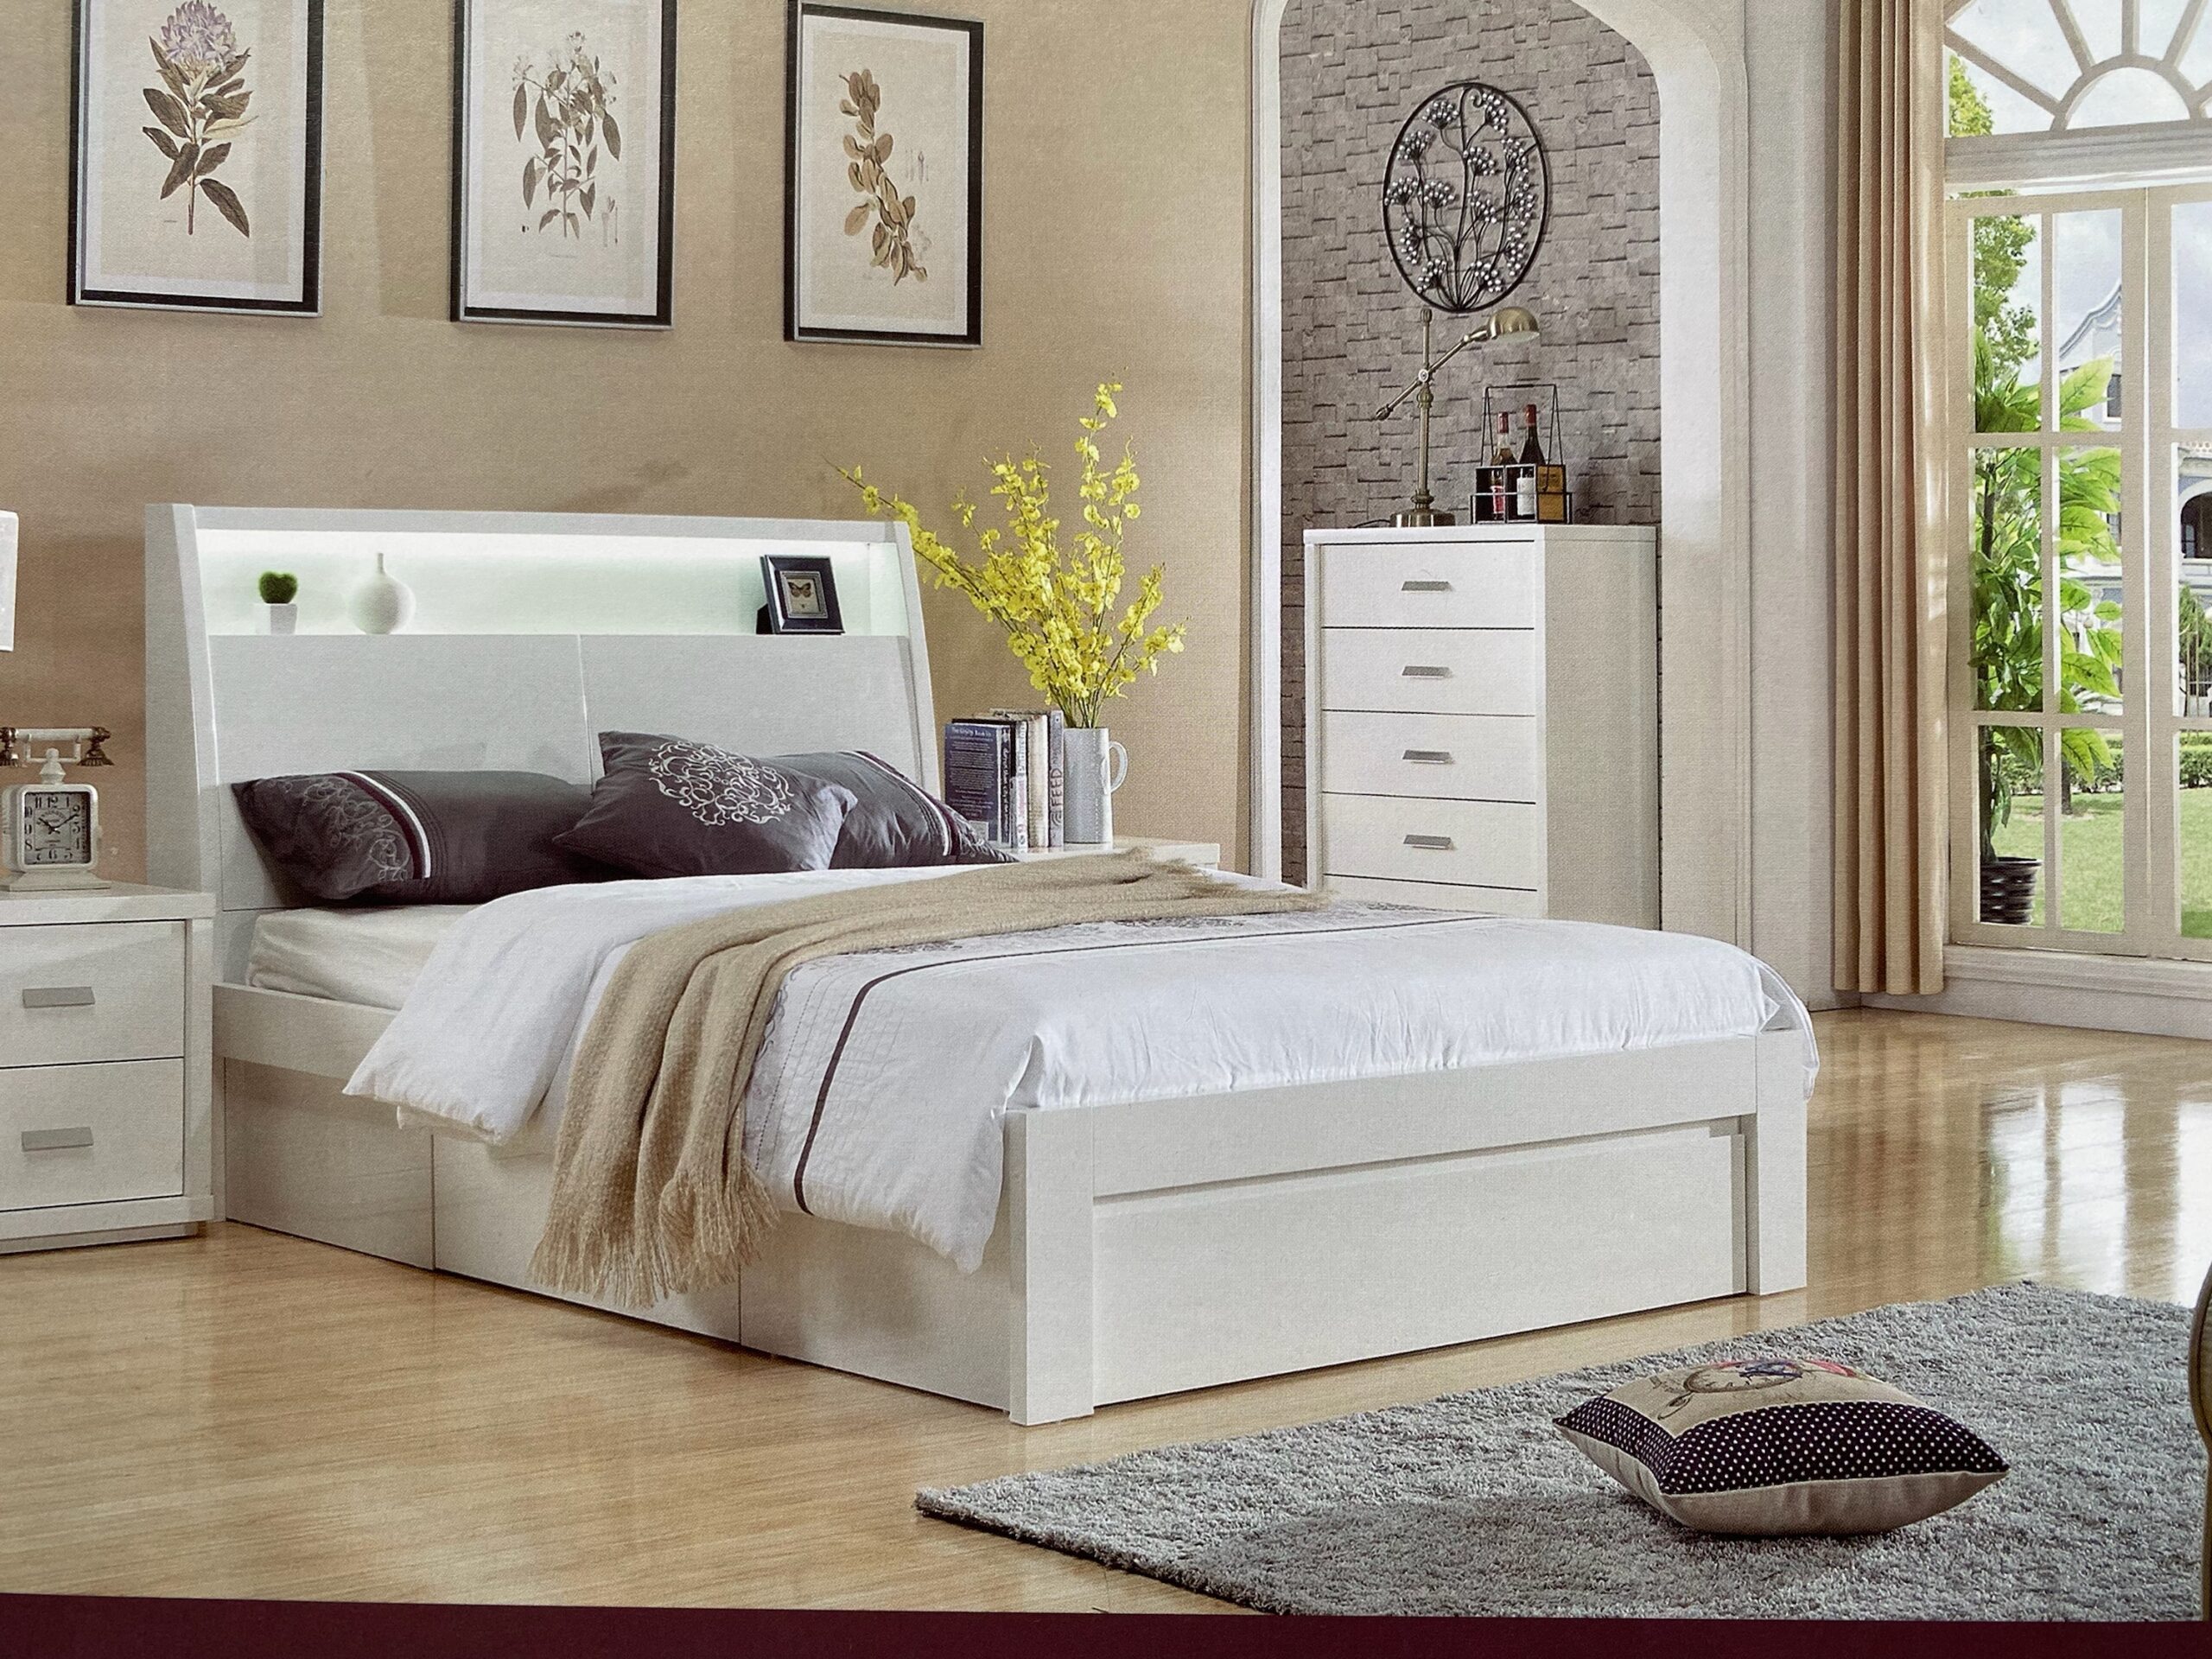 Europa Glossy white bed